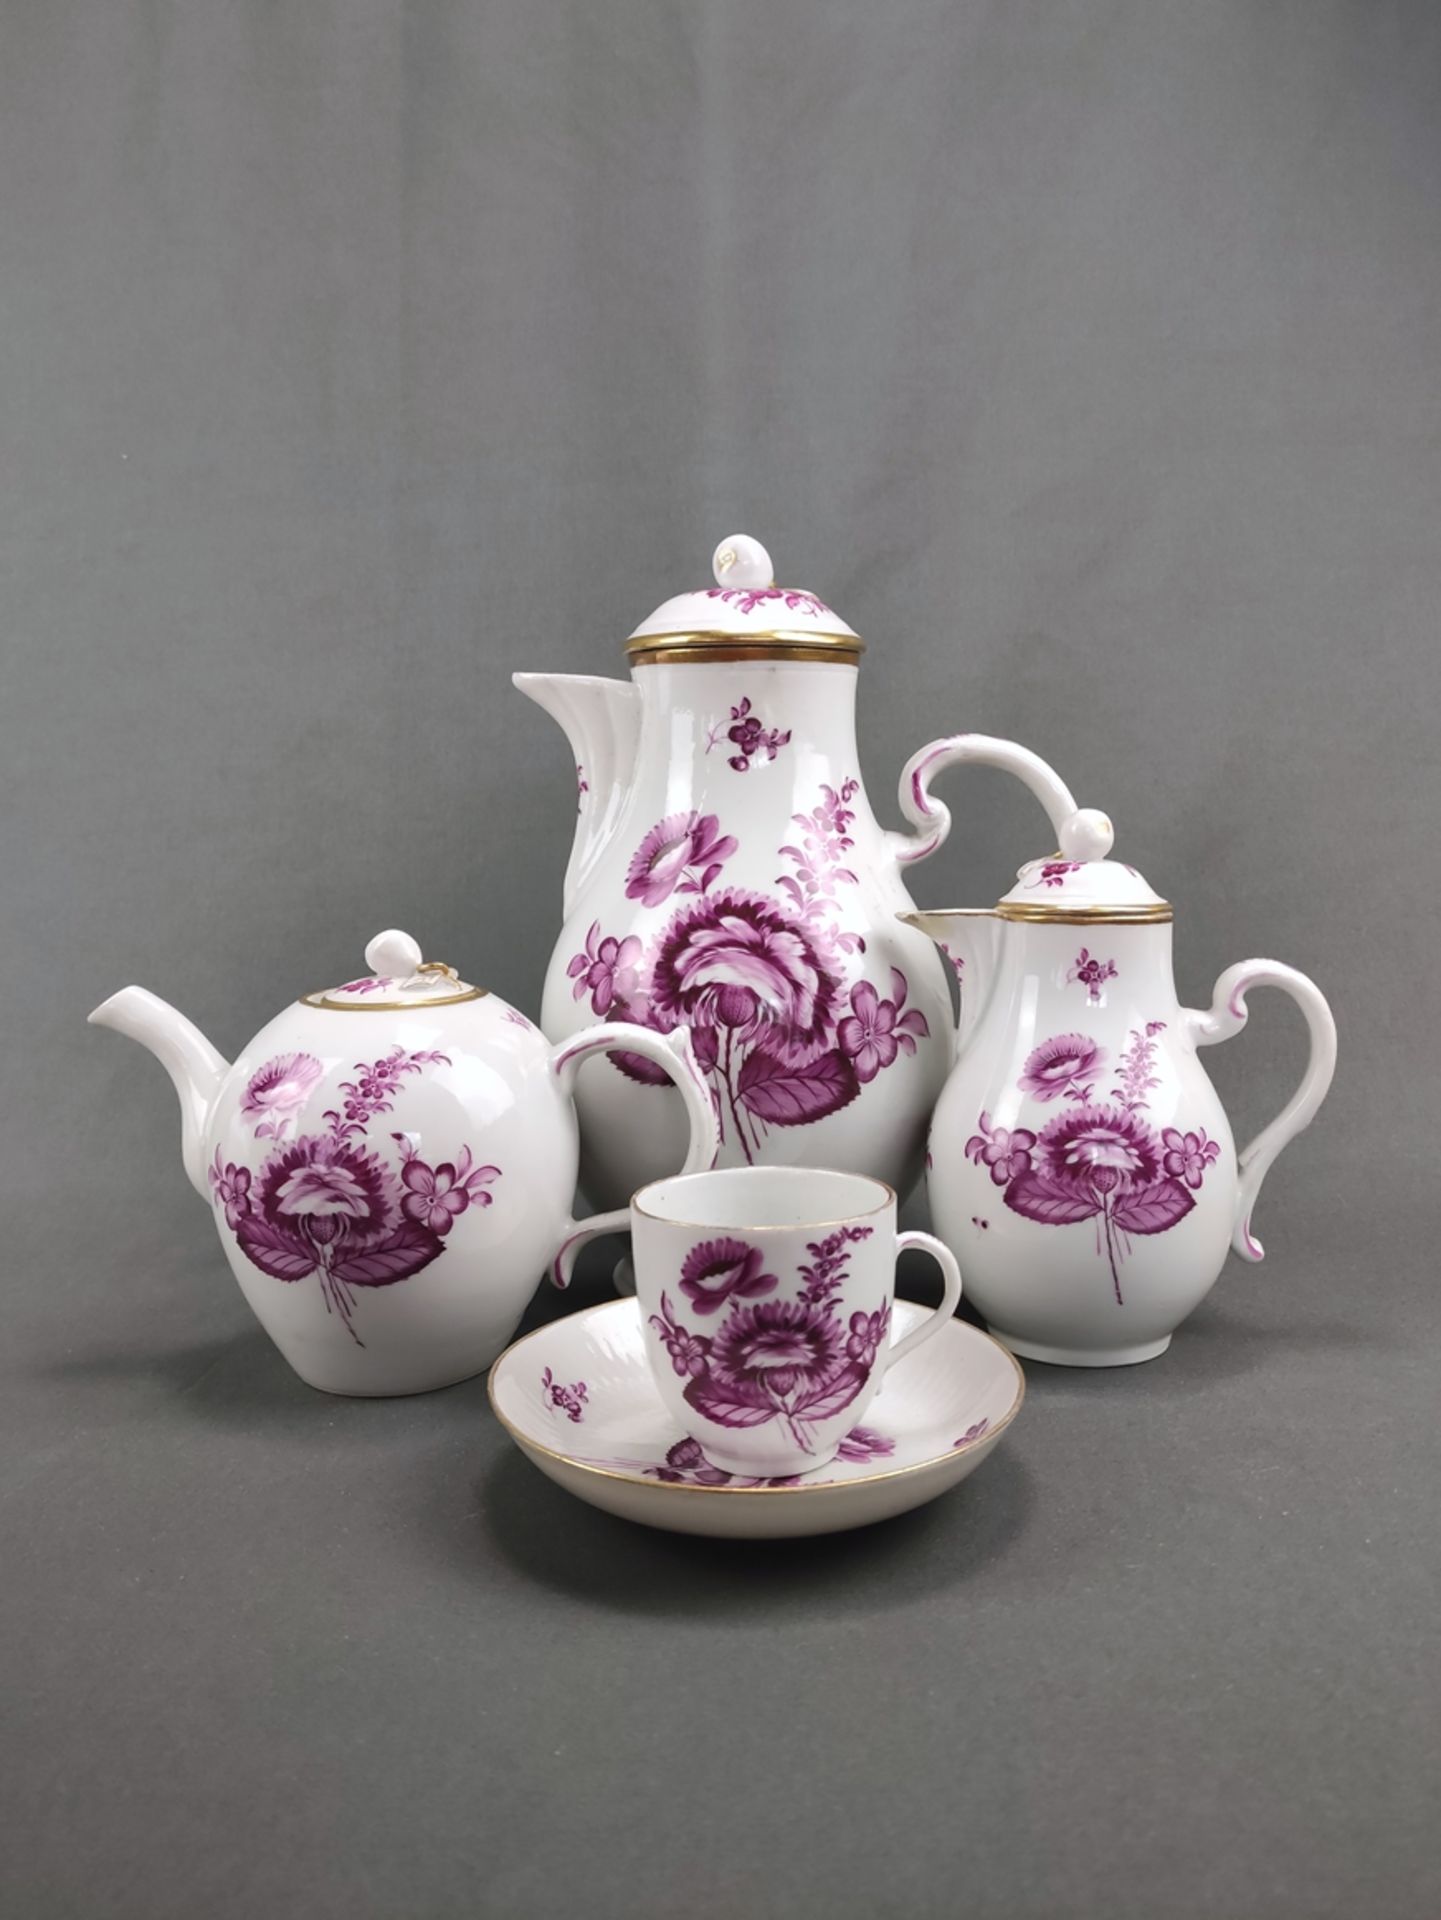 Three teapots and three mocha cups with saucers, Volkstedt Rudolstadt, around 1900, purple floral p - Image 2 of 4